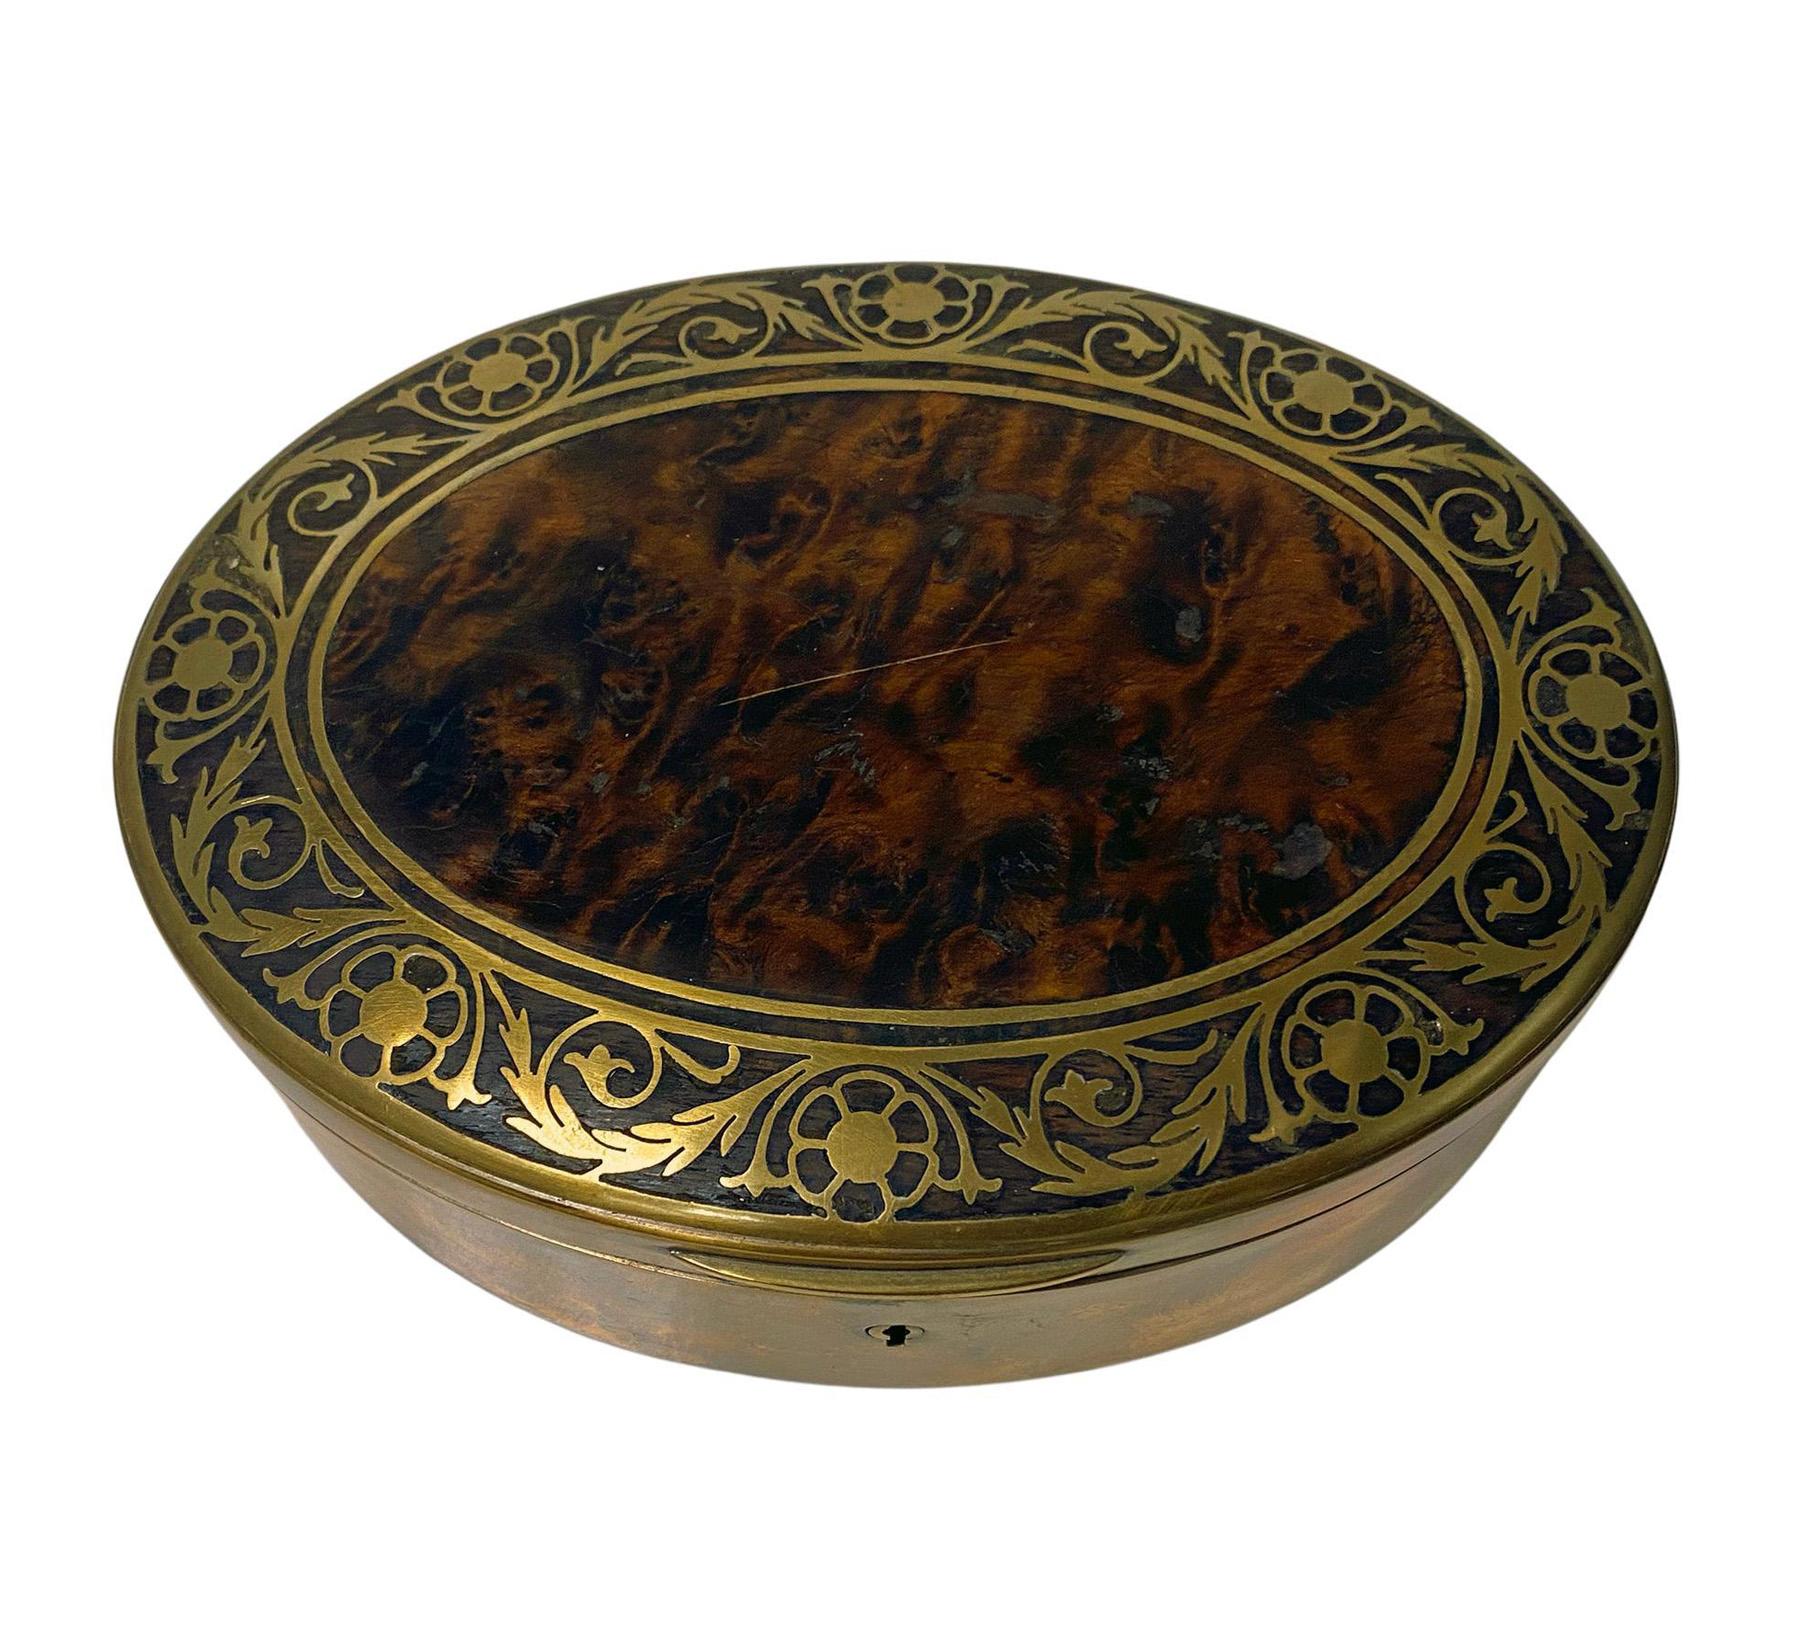 Erhard & Sohne burlwood covered Jewellery box, Germany C.1900. The oval box with brass inlay intarsia design work, original velvet lining. Good tight fit, brass inlay in very good condition, light minimal surface wear to burl, commensurate with age,